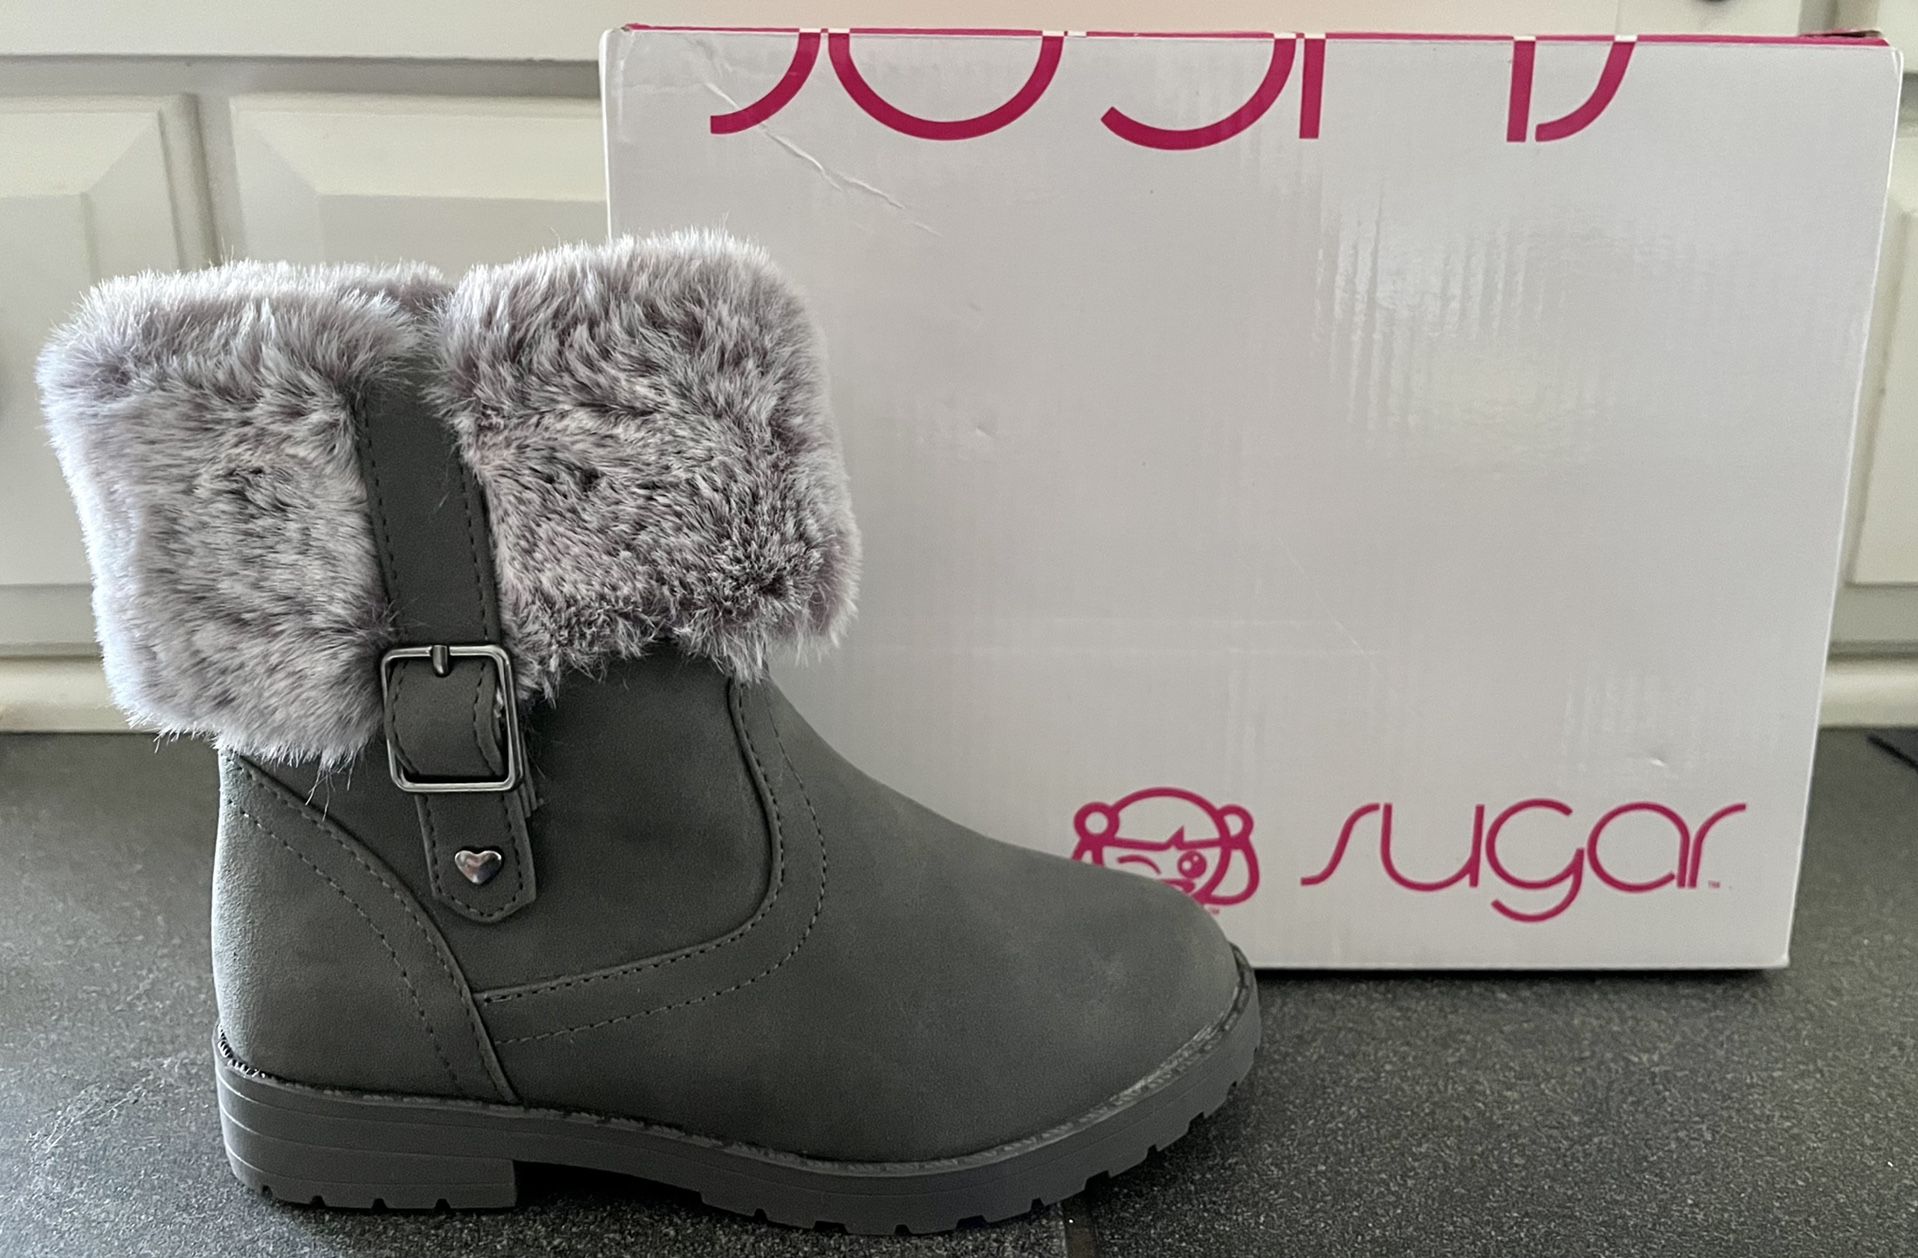 New In Box, SUGAR Girls Boots Size 9